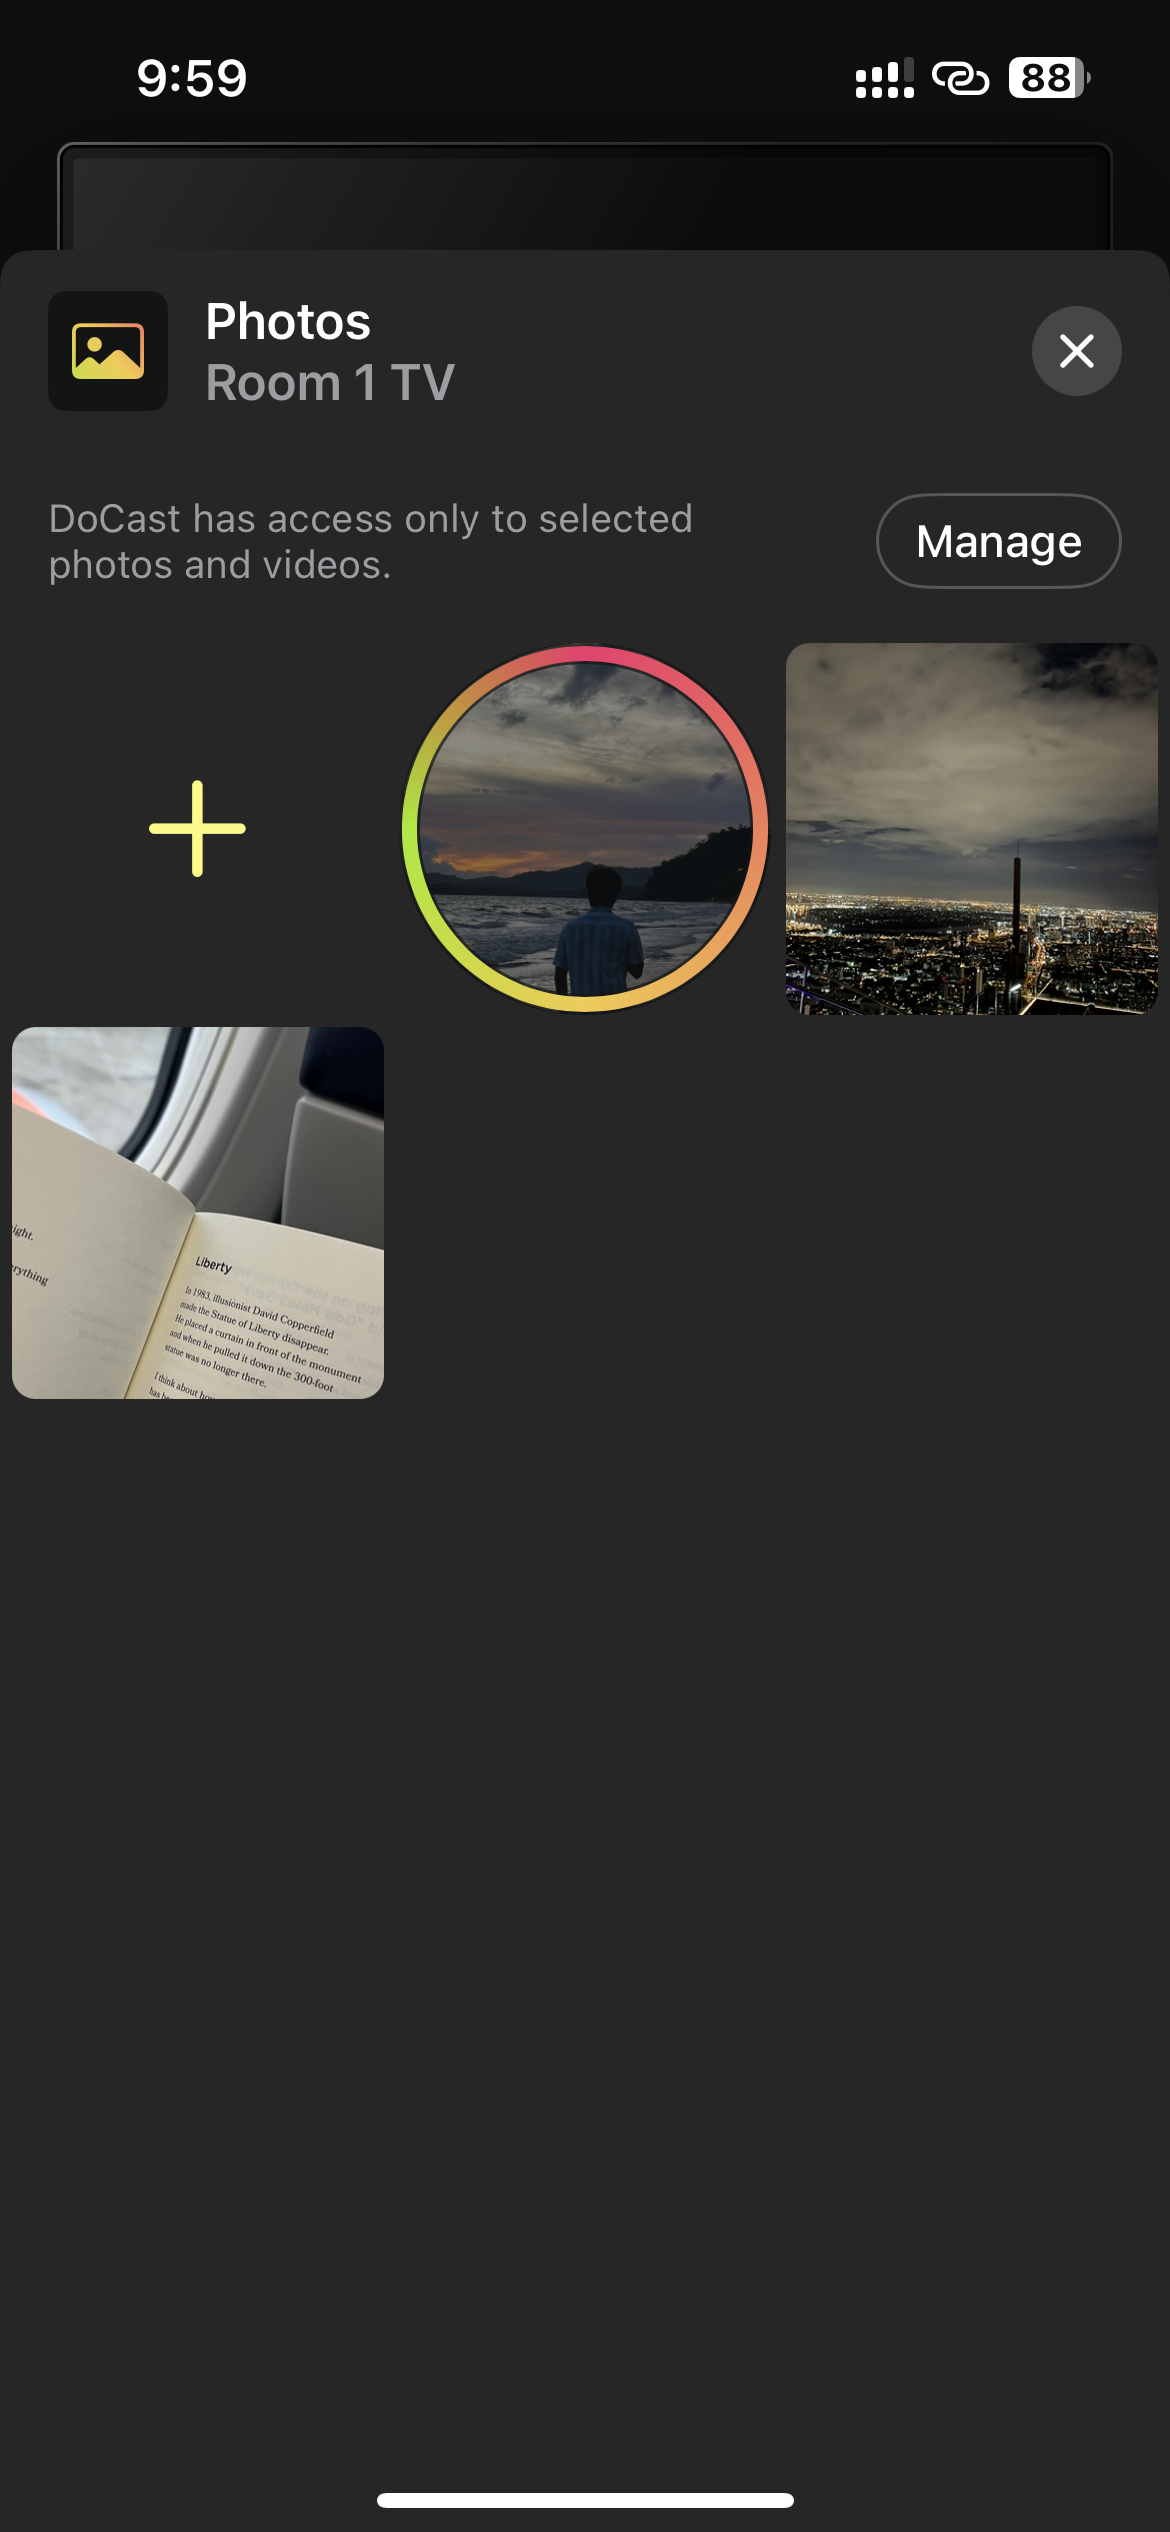 Select a photo on your iPhone through DoCast